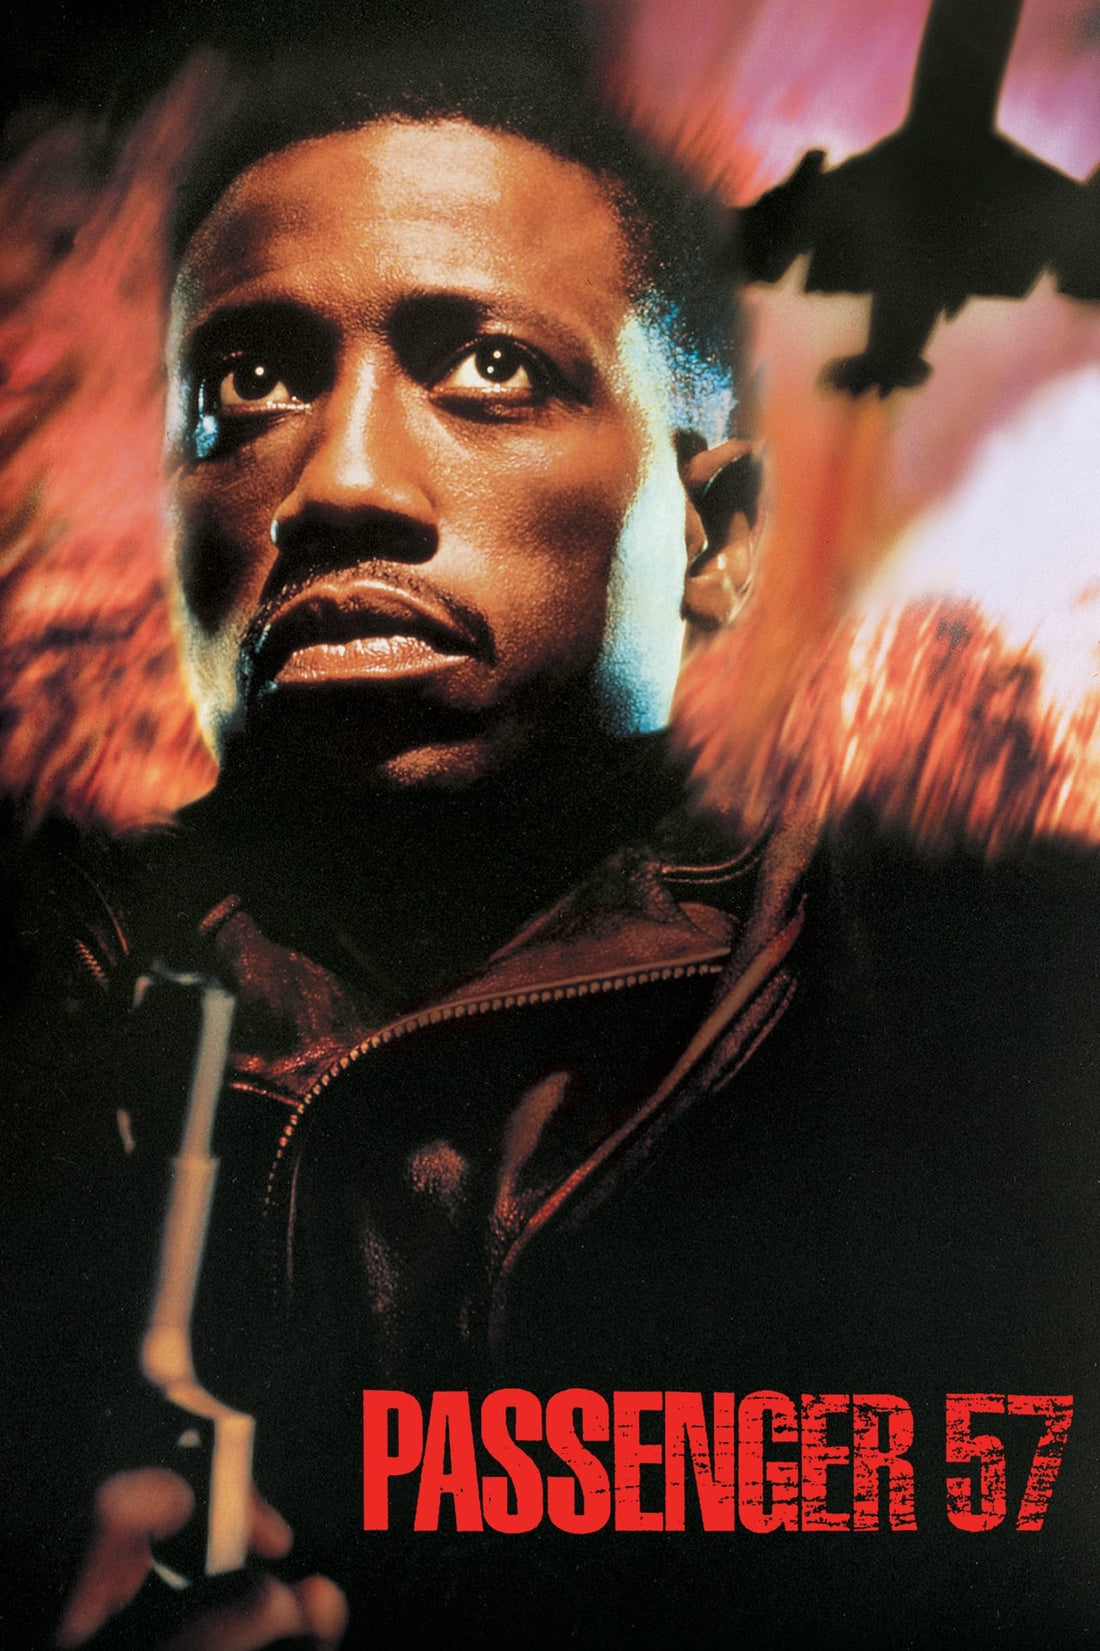 Where to watch Passenger 57 Black Action Movie